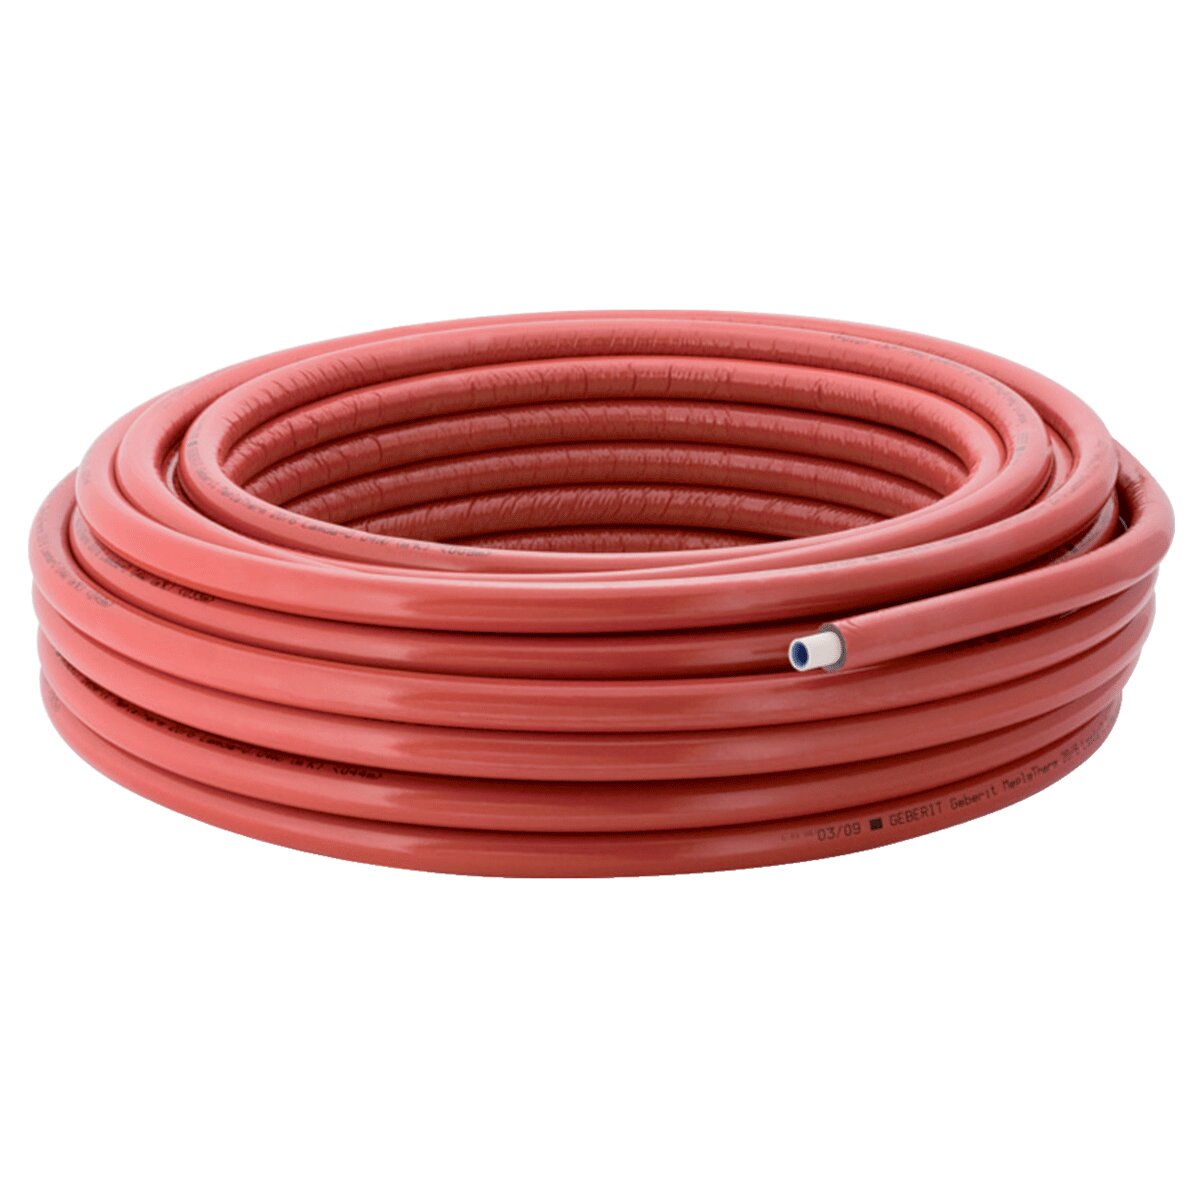 Geberit Mepla Therm multilayer pipe Ø16x6 with 6 mm insulating sheath - For heating